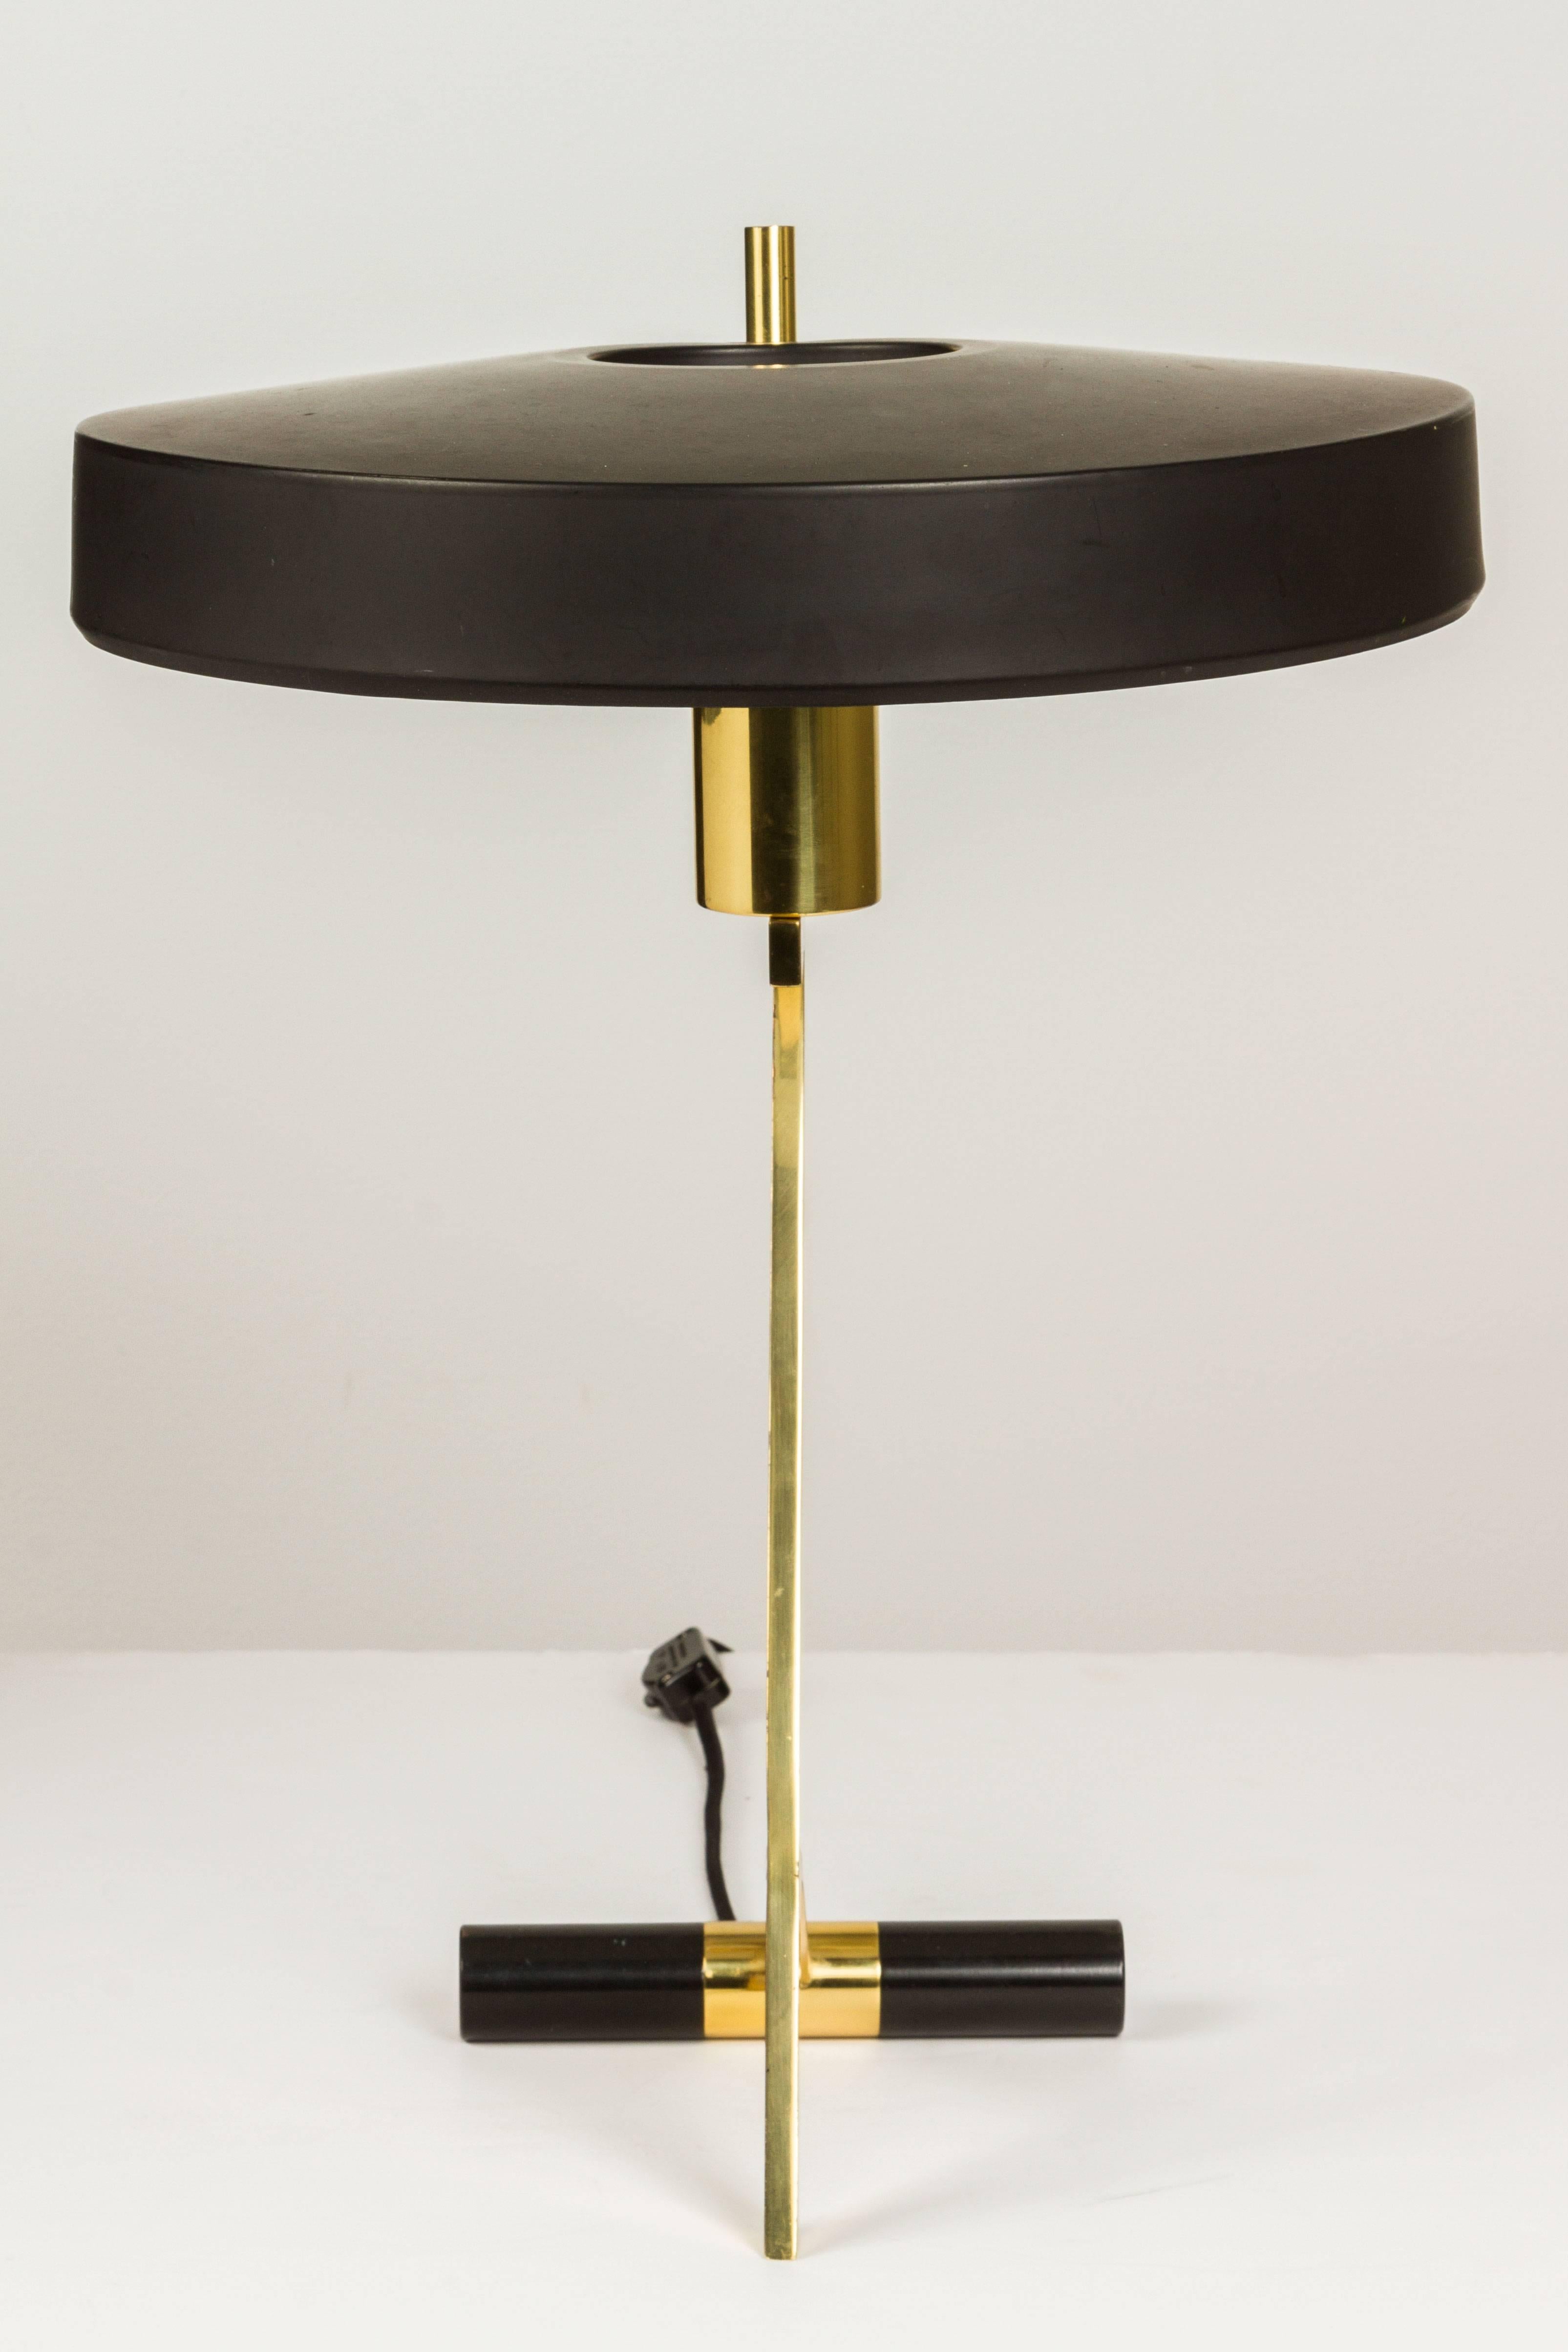 Architectural iconic table lamp executed in black metal and brass by Louis Christiaan Kalff for Philips Eindhoven in 1955.
 